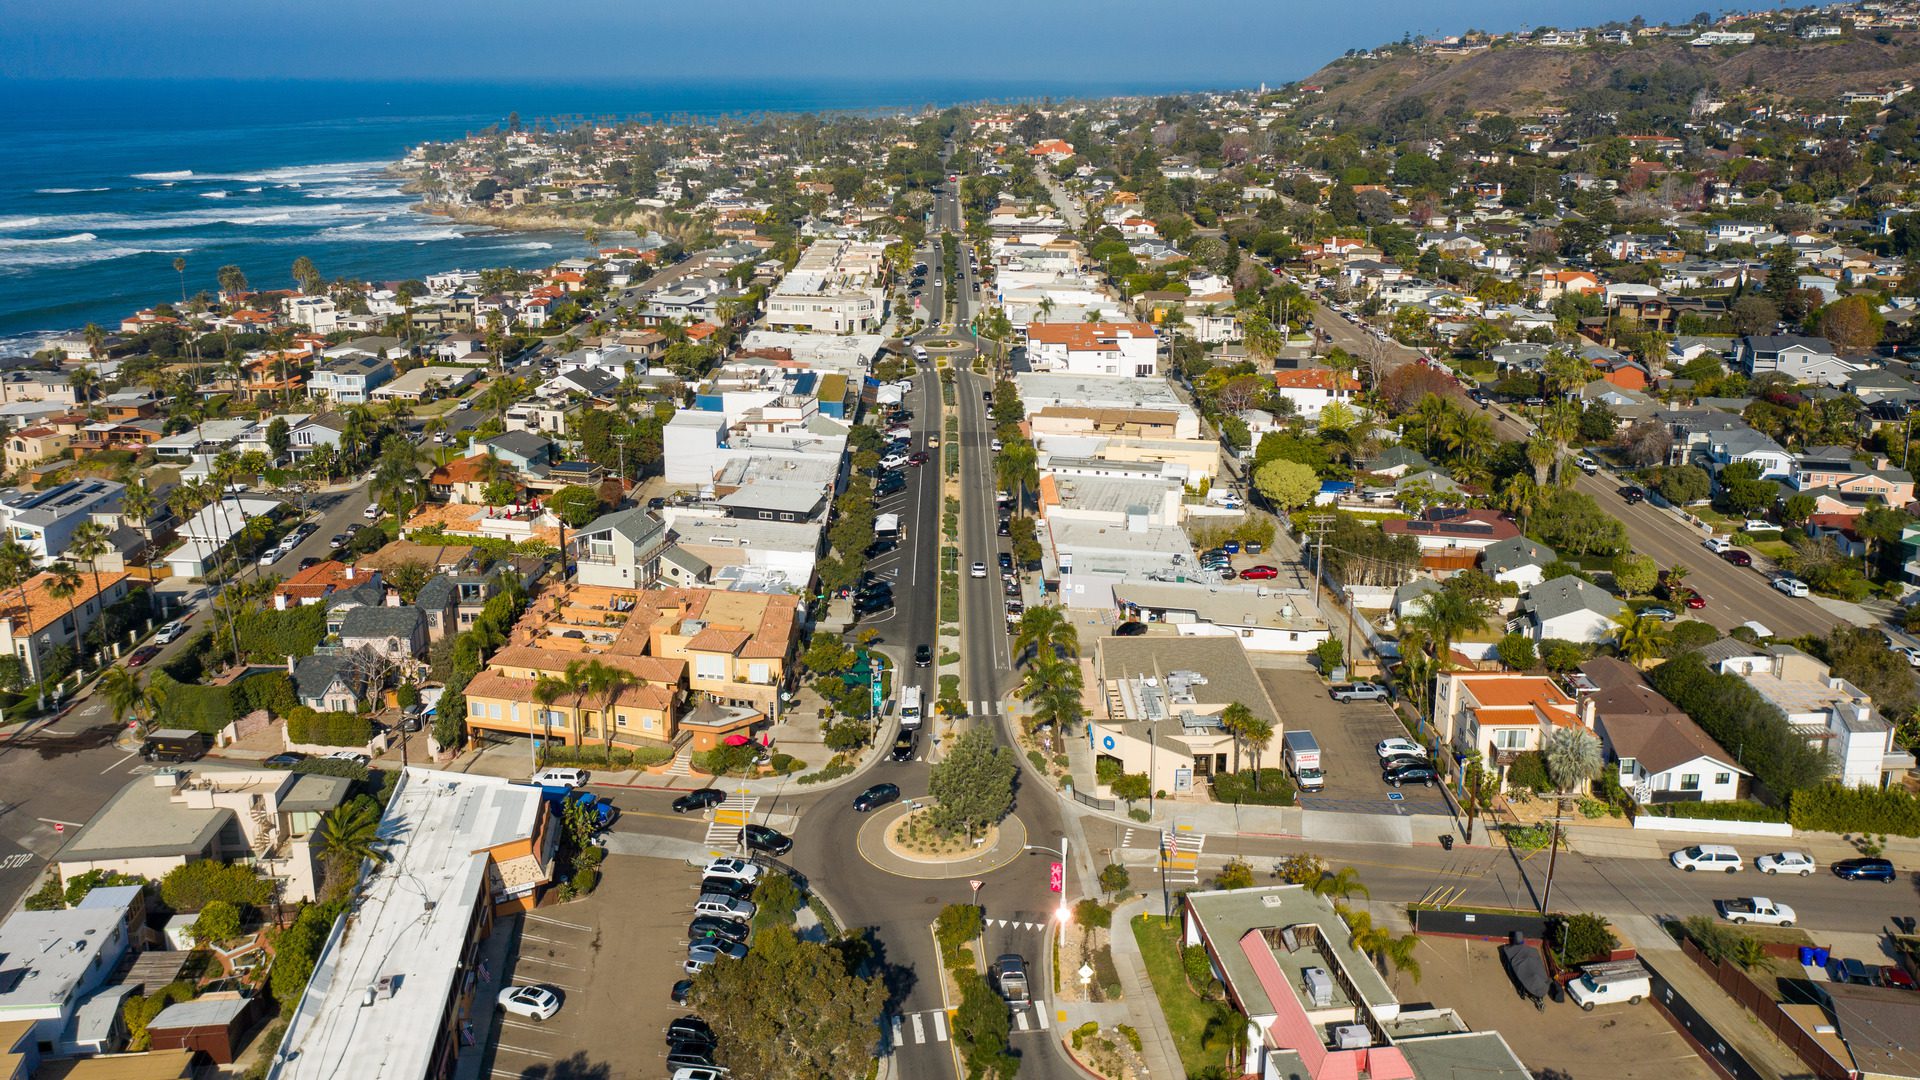 drone view of the community of bird rock with merchants on either side of street. Pacific Ocean on horizon